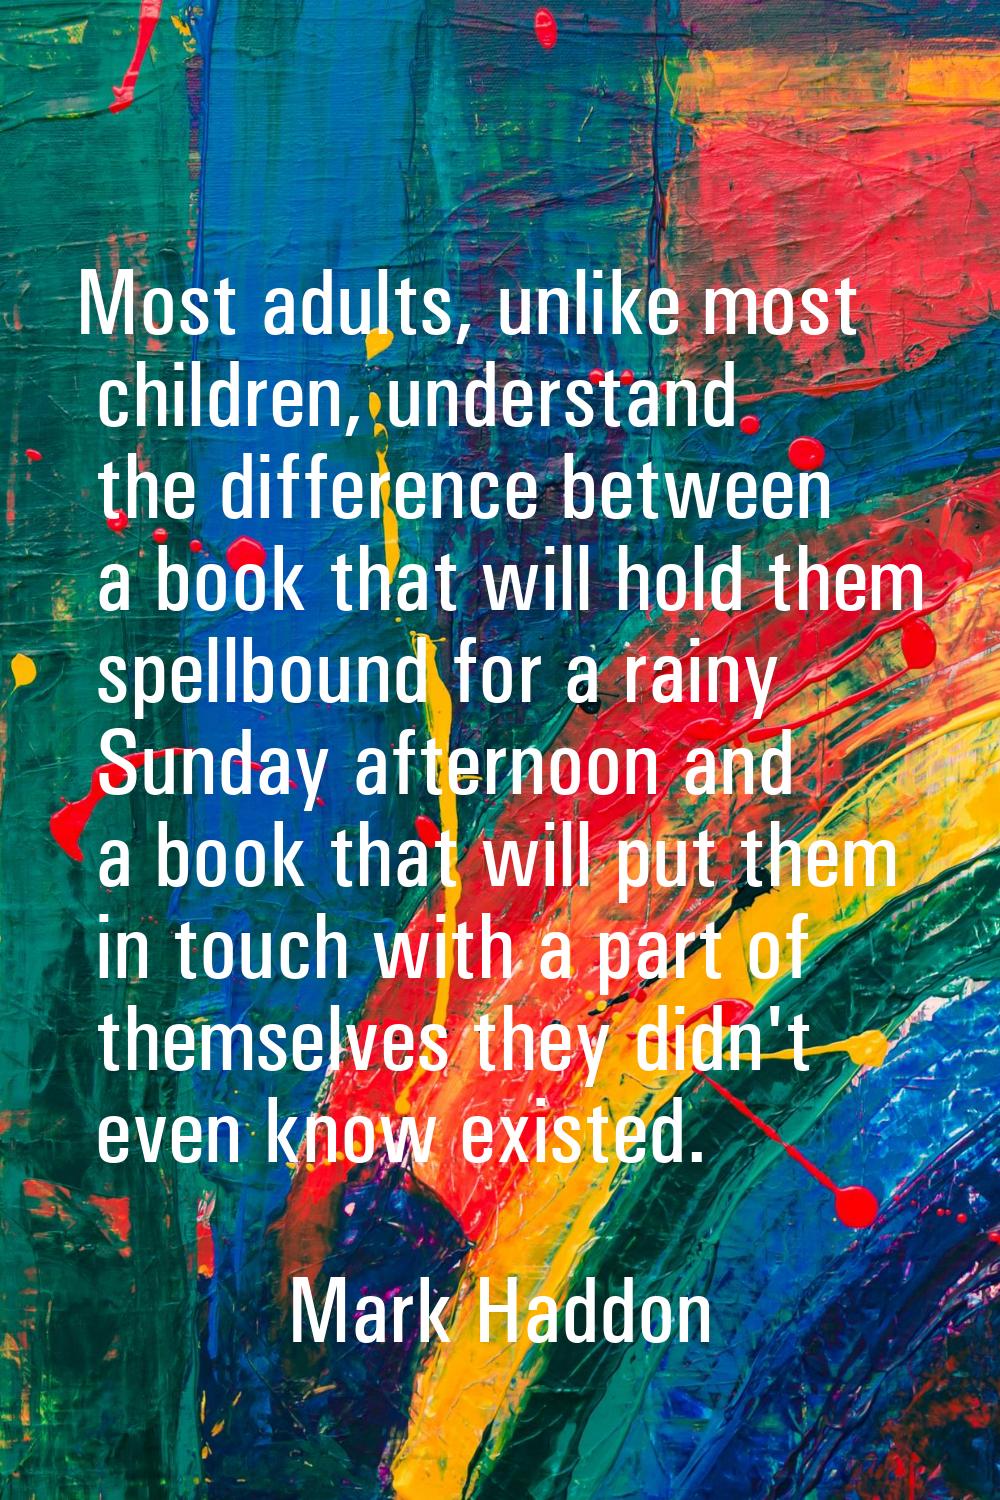 Most adults, unlike most children, understand the difference between a book that will hold them spe